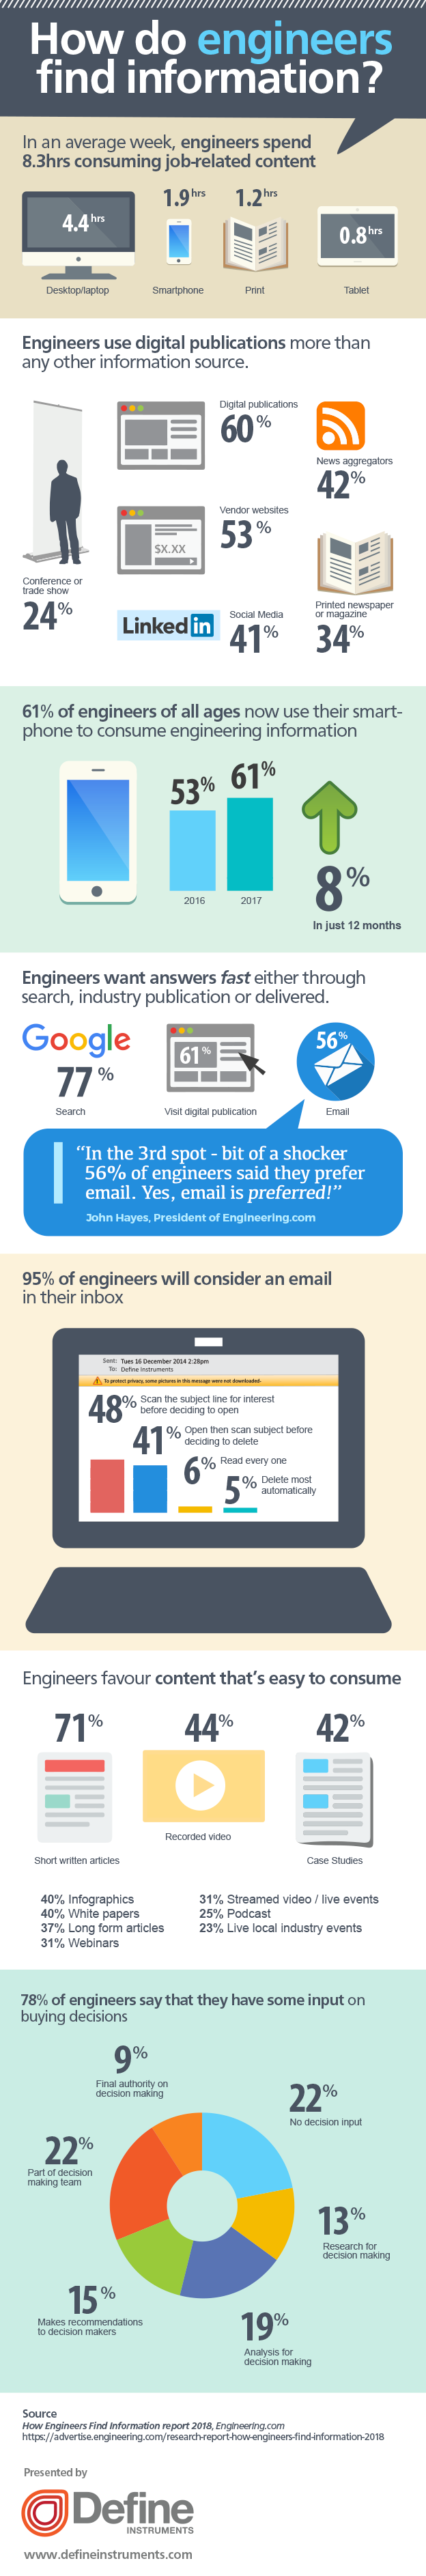 How Engineers Find Information (infographic)